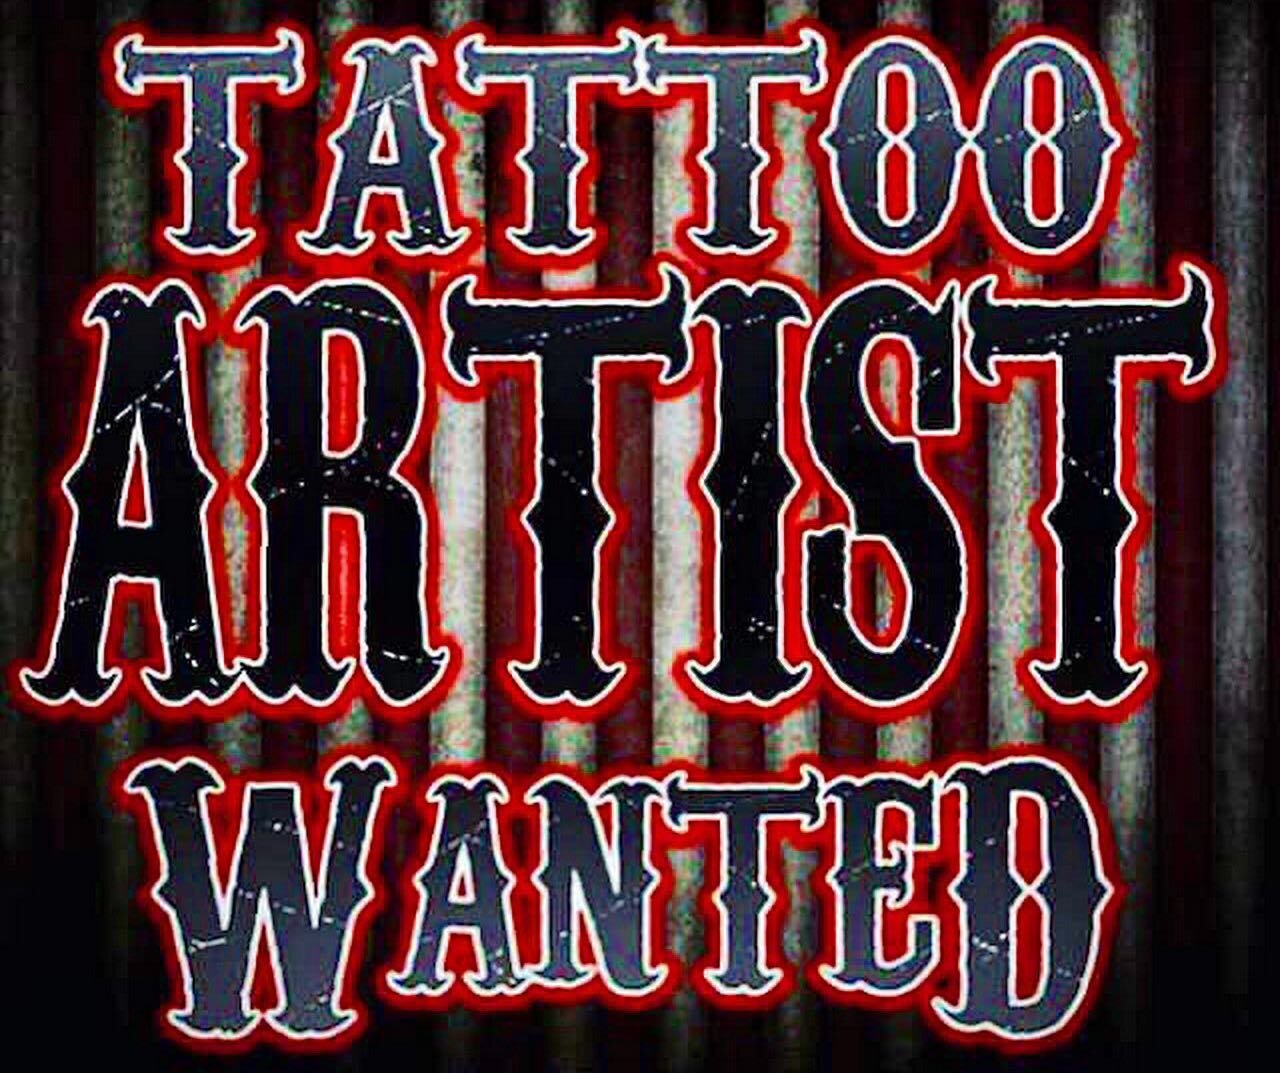 We are looking for full time artists.  Ready to work on the beach? 12-8 5 days a week starting immediately. Shop provides every supply needed. We are a high volume walk in shop est 2009.

Are you currently in a shop where artists are always late, hun